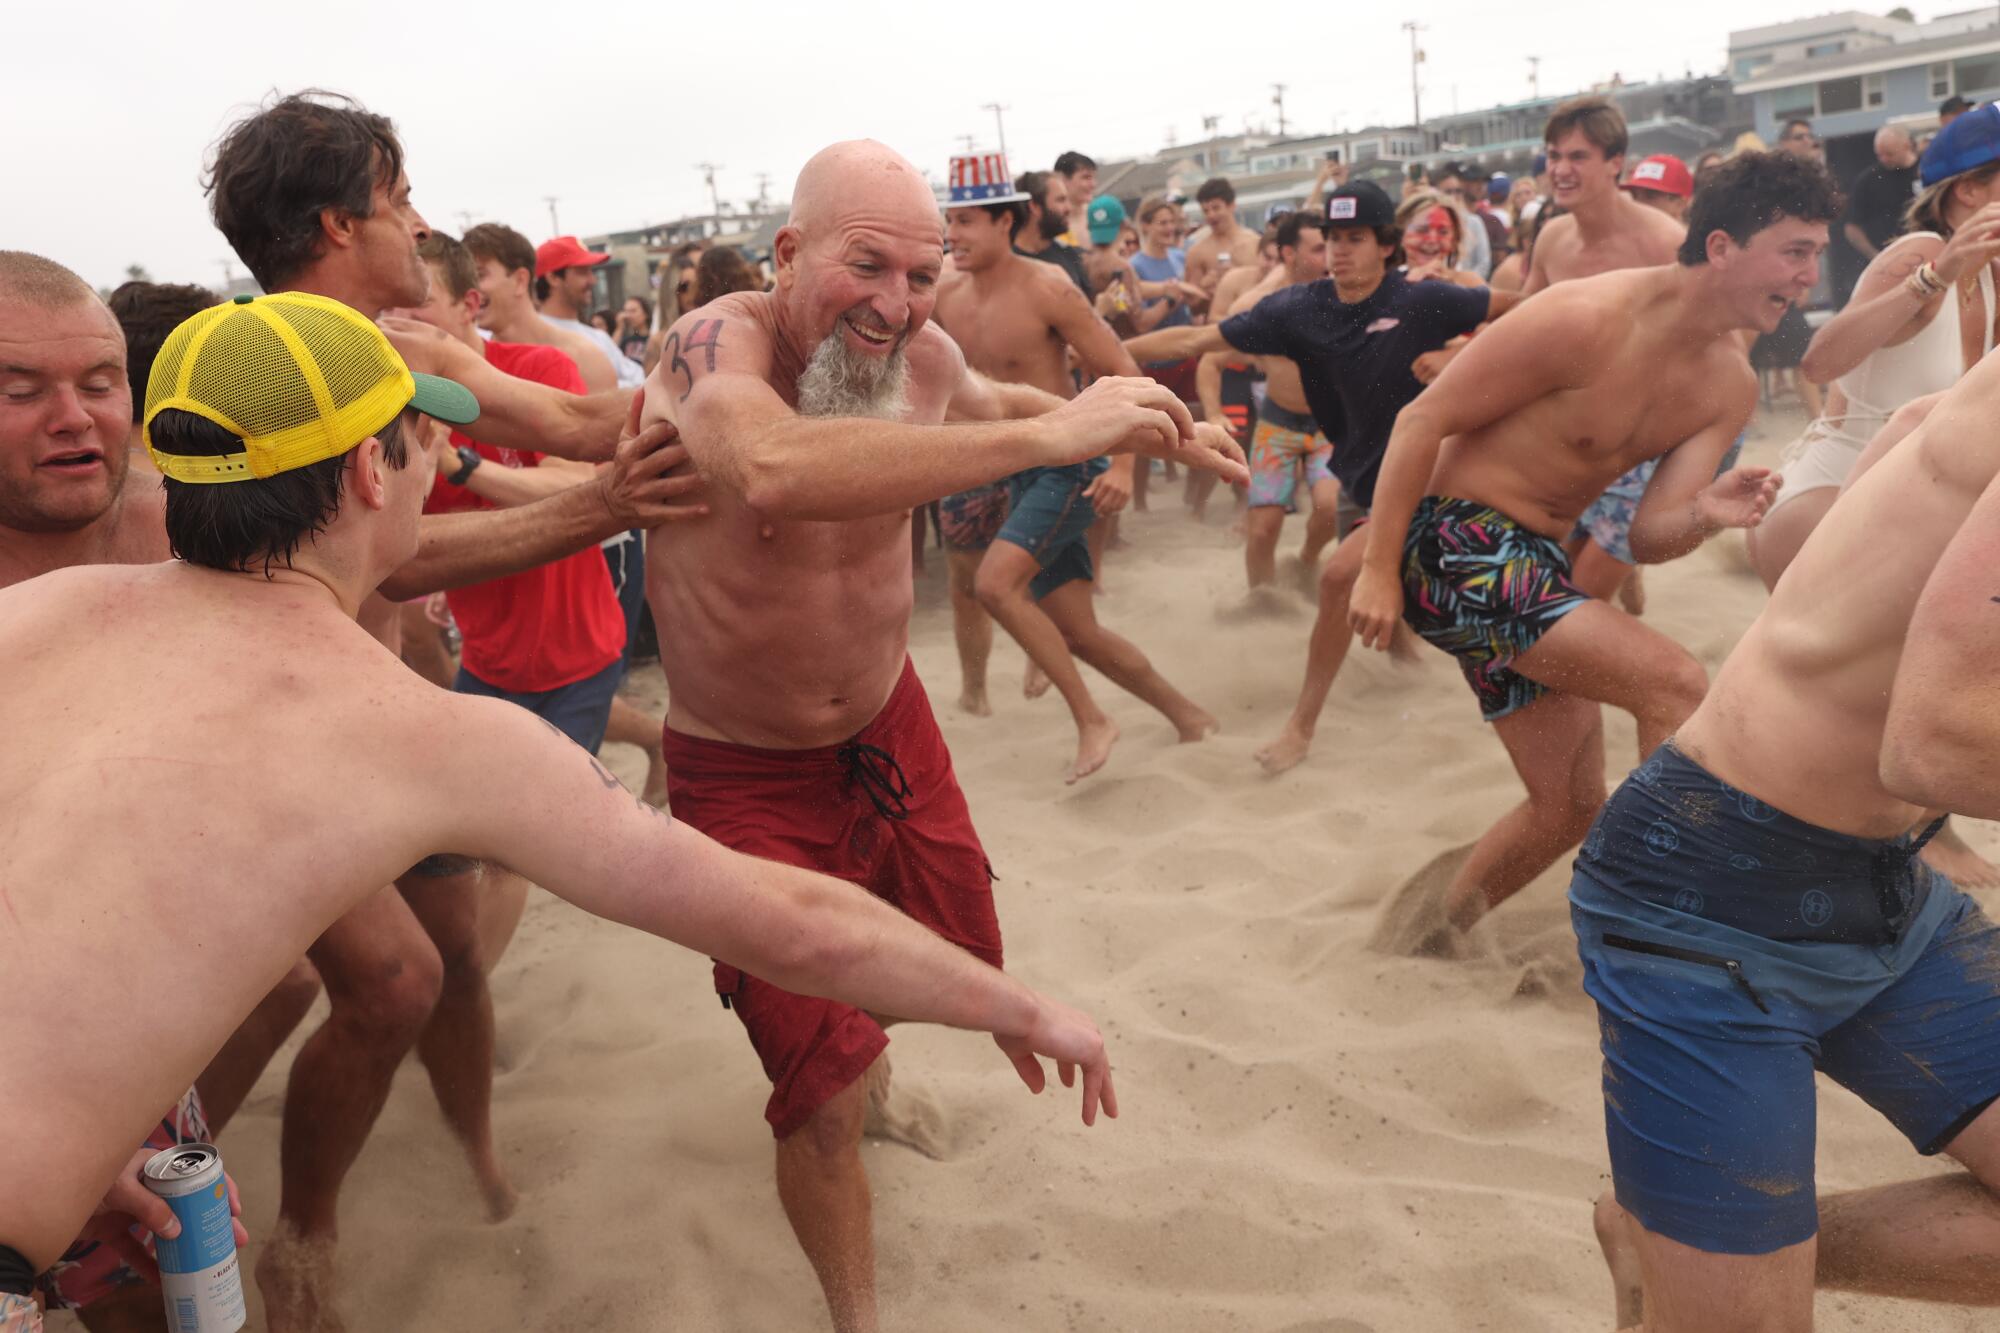 Participants keep loose in a mosh pit during the Hermosa Beach Ironman on July 4.